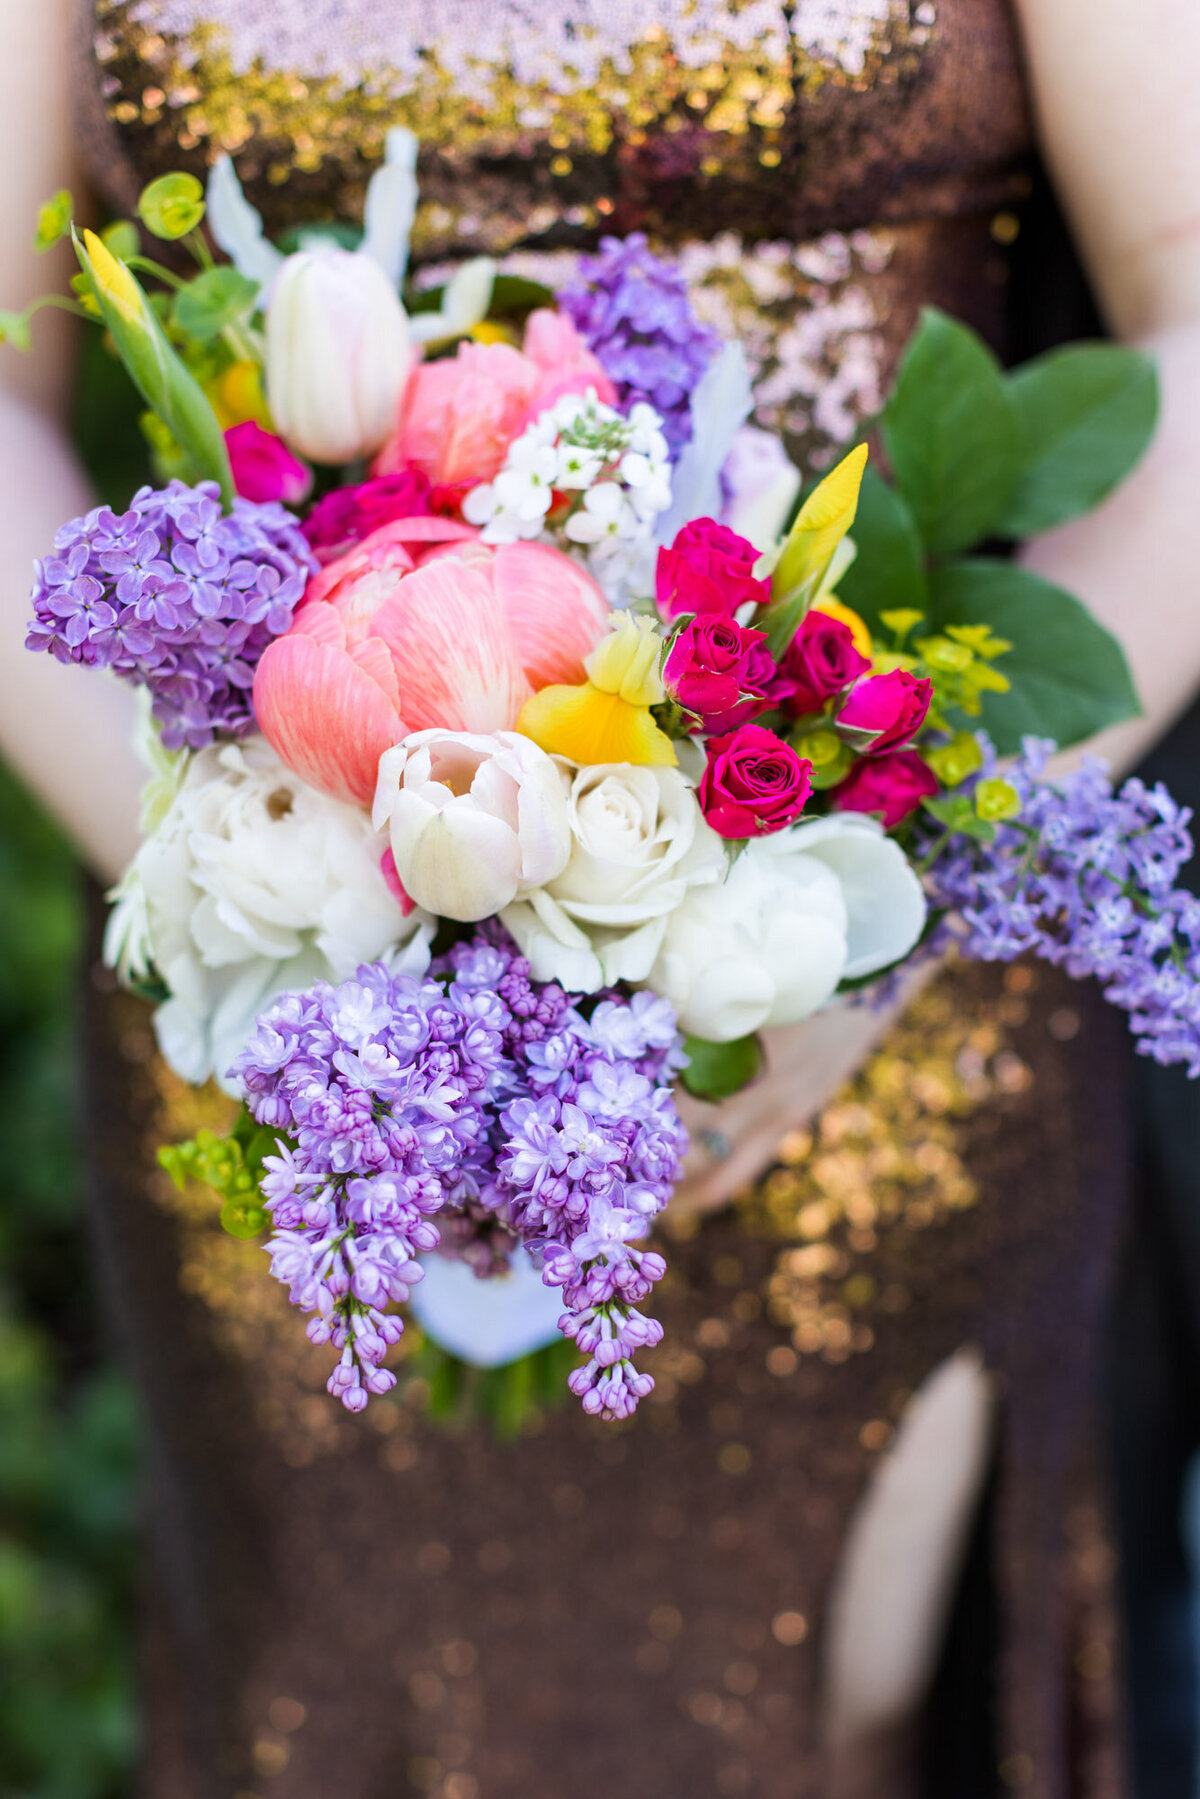 Colorful-bridal-bouquet-with-hyacinths,-roses-and-peonies-at-wedding-at-Willows-Lodge-in-Woodiville,-WA-photo-by-Joanna-Monger-Photography